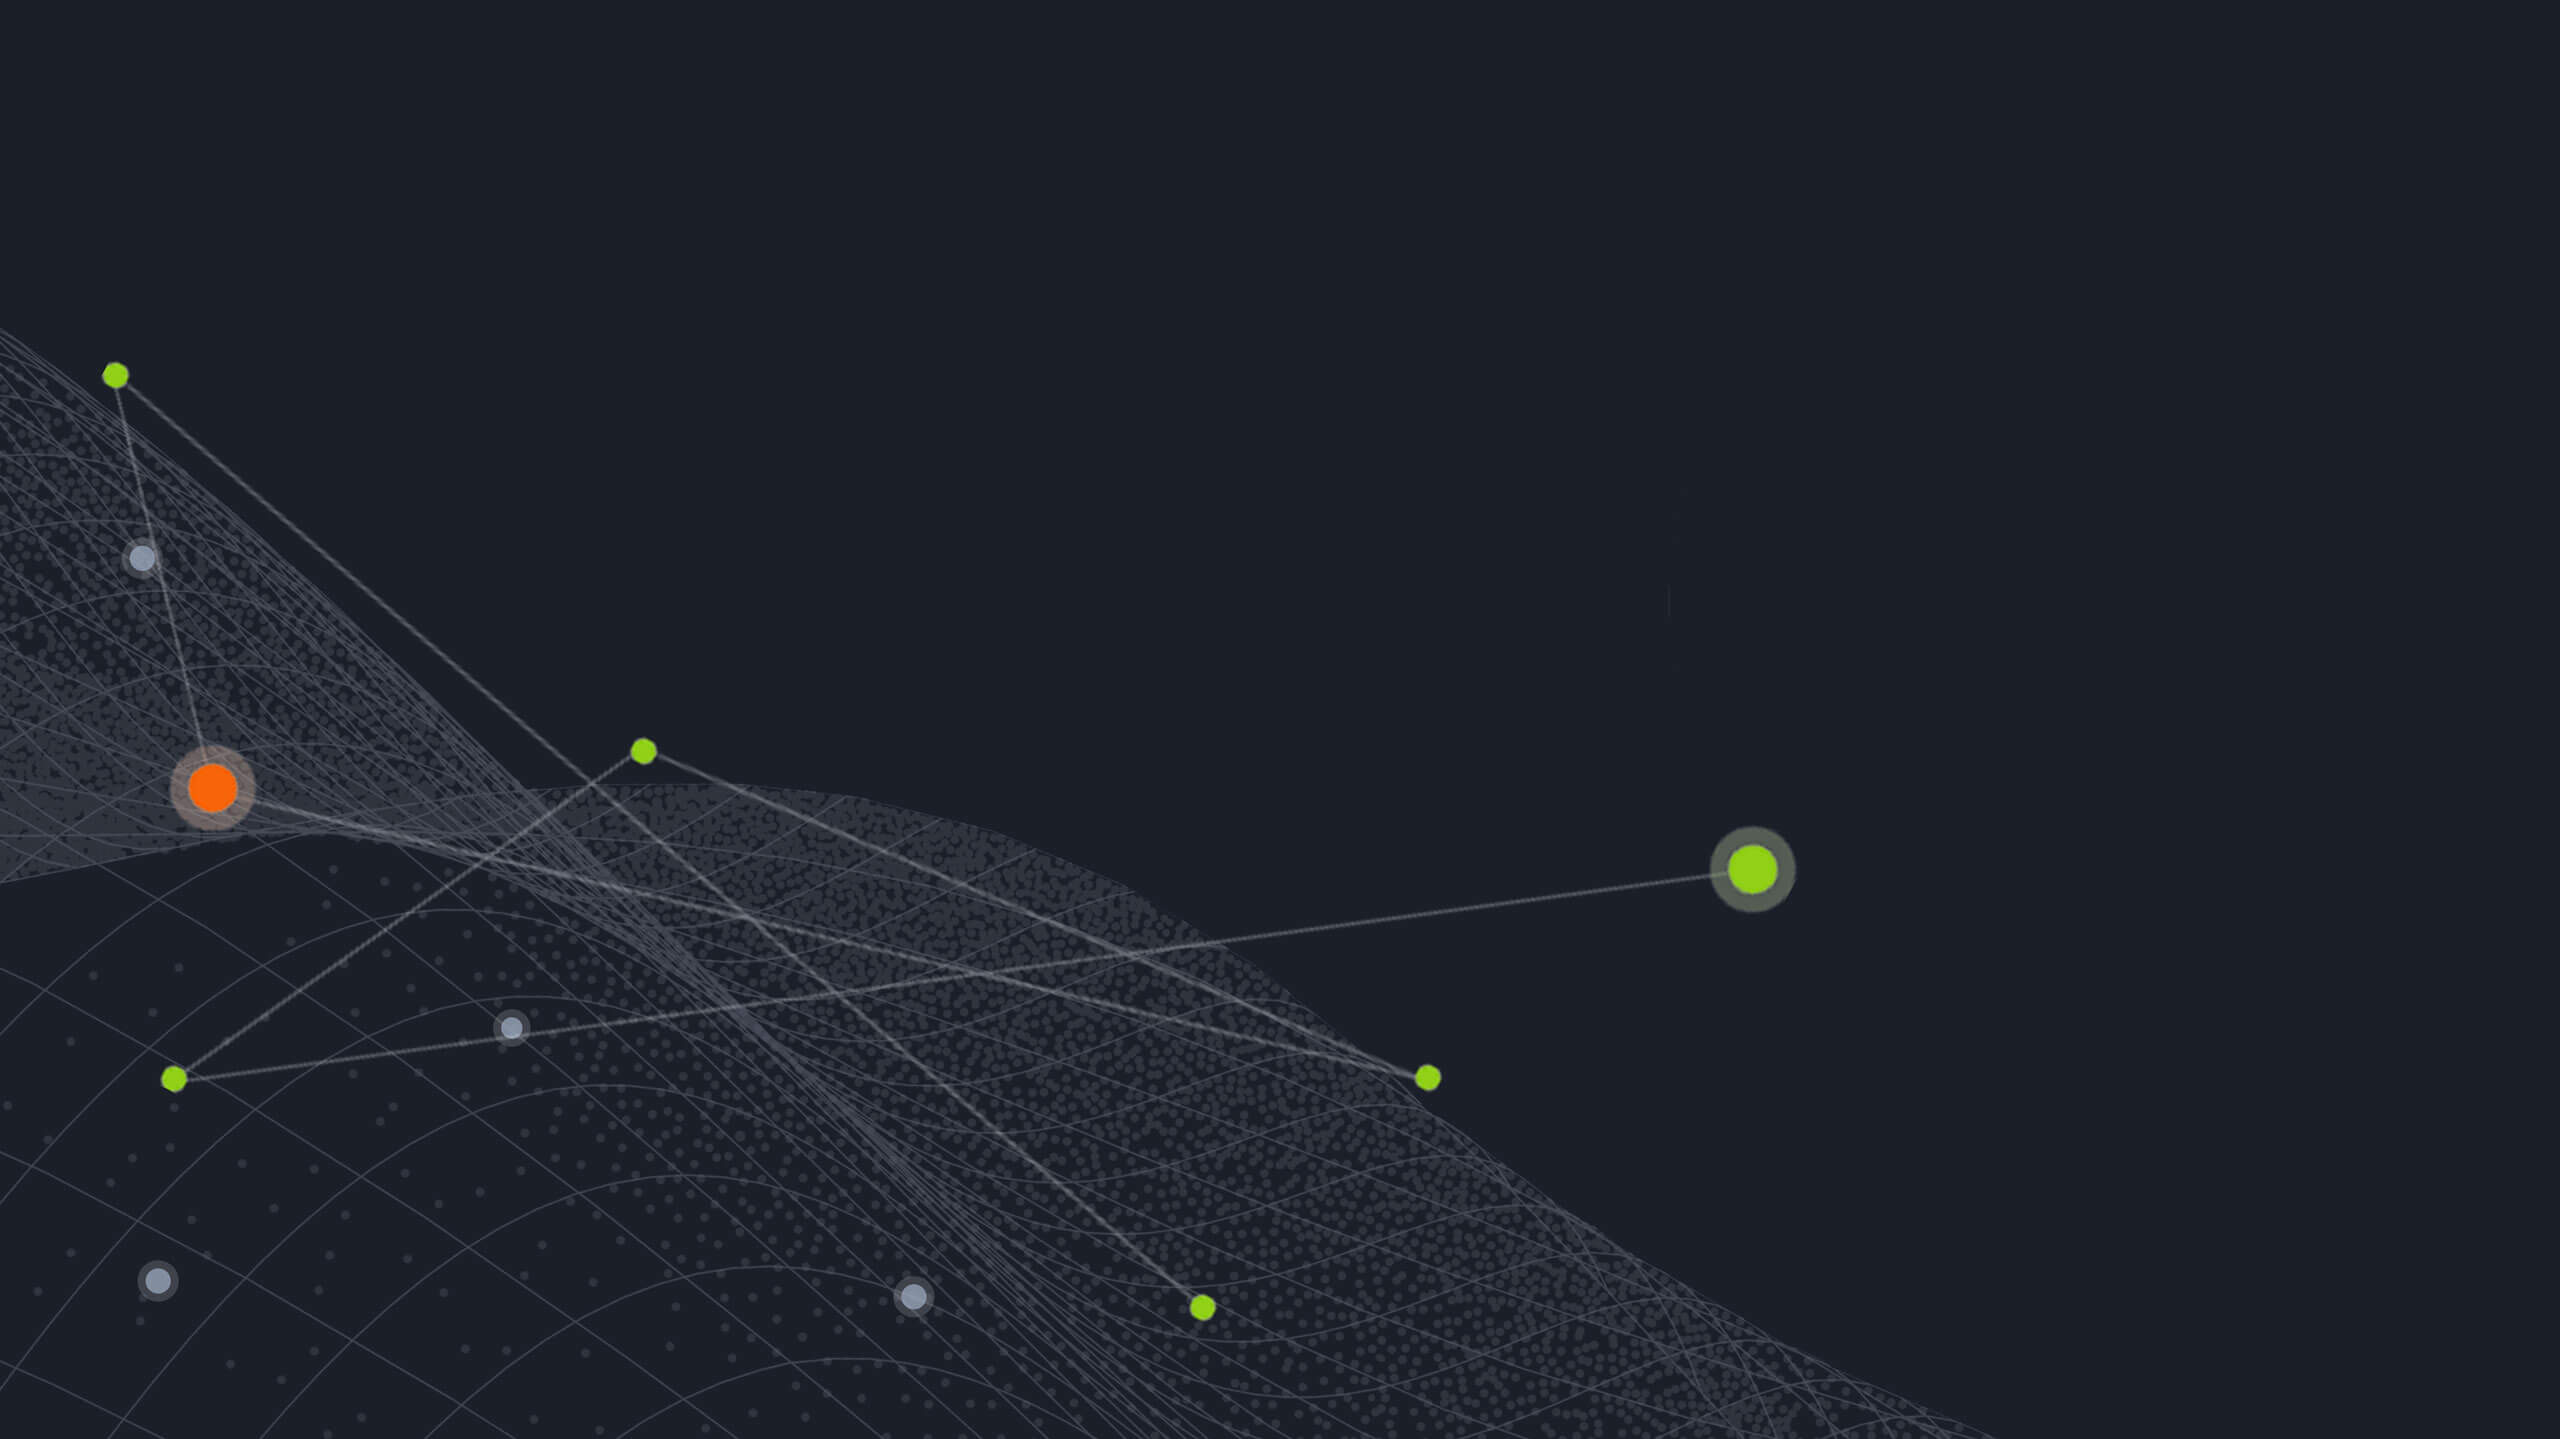 An abstract network visualization with interconnected lines and nodes on a dark background. nodes are colored differently, with one prominent orange and another green.